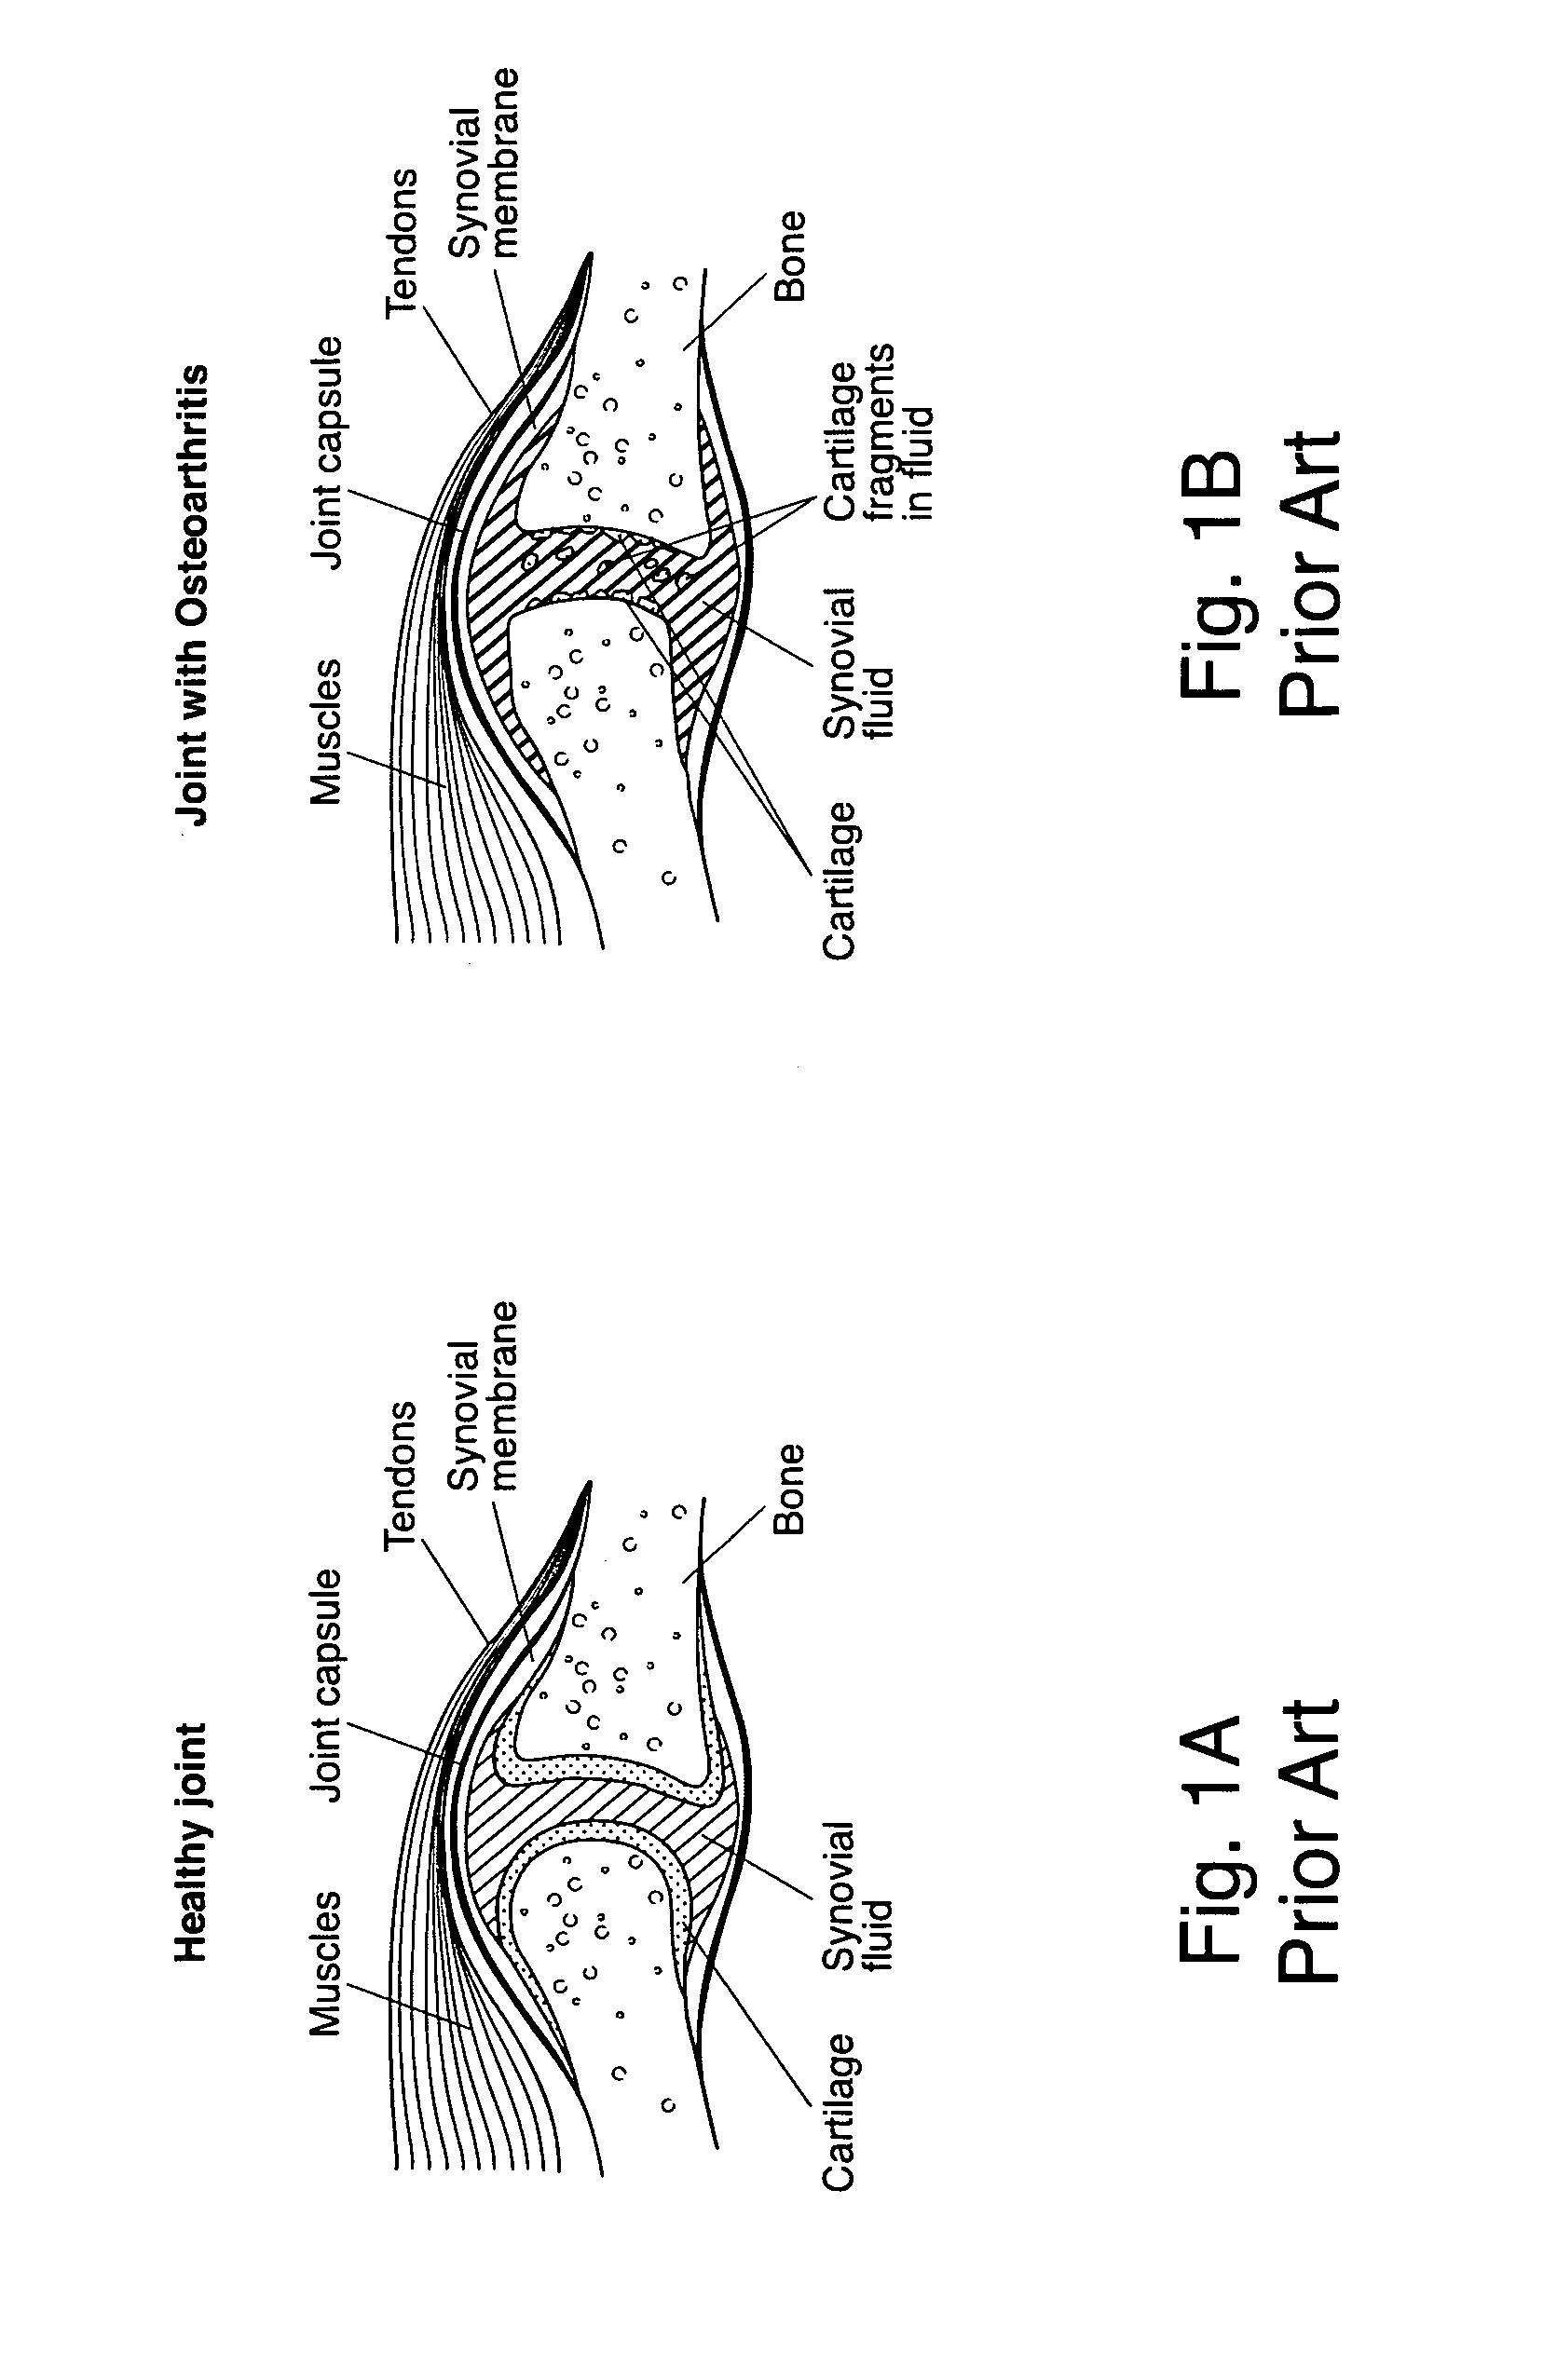 Method for treating cartilage defects